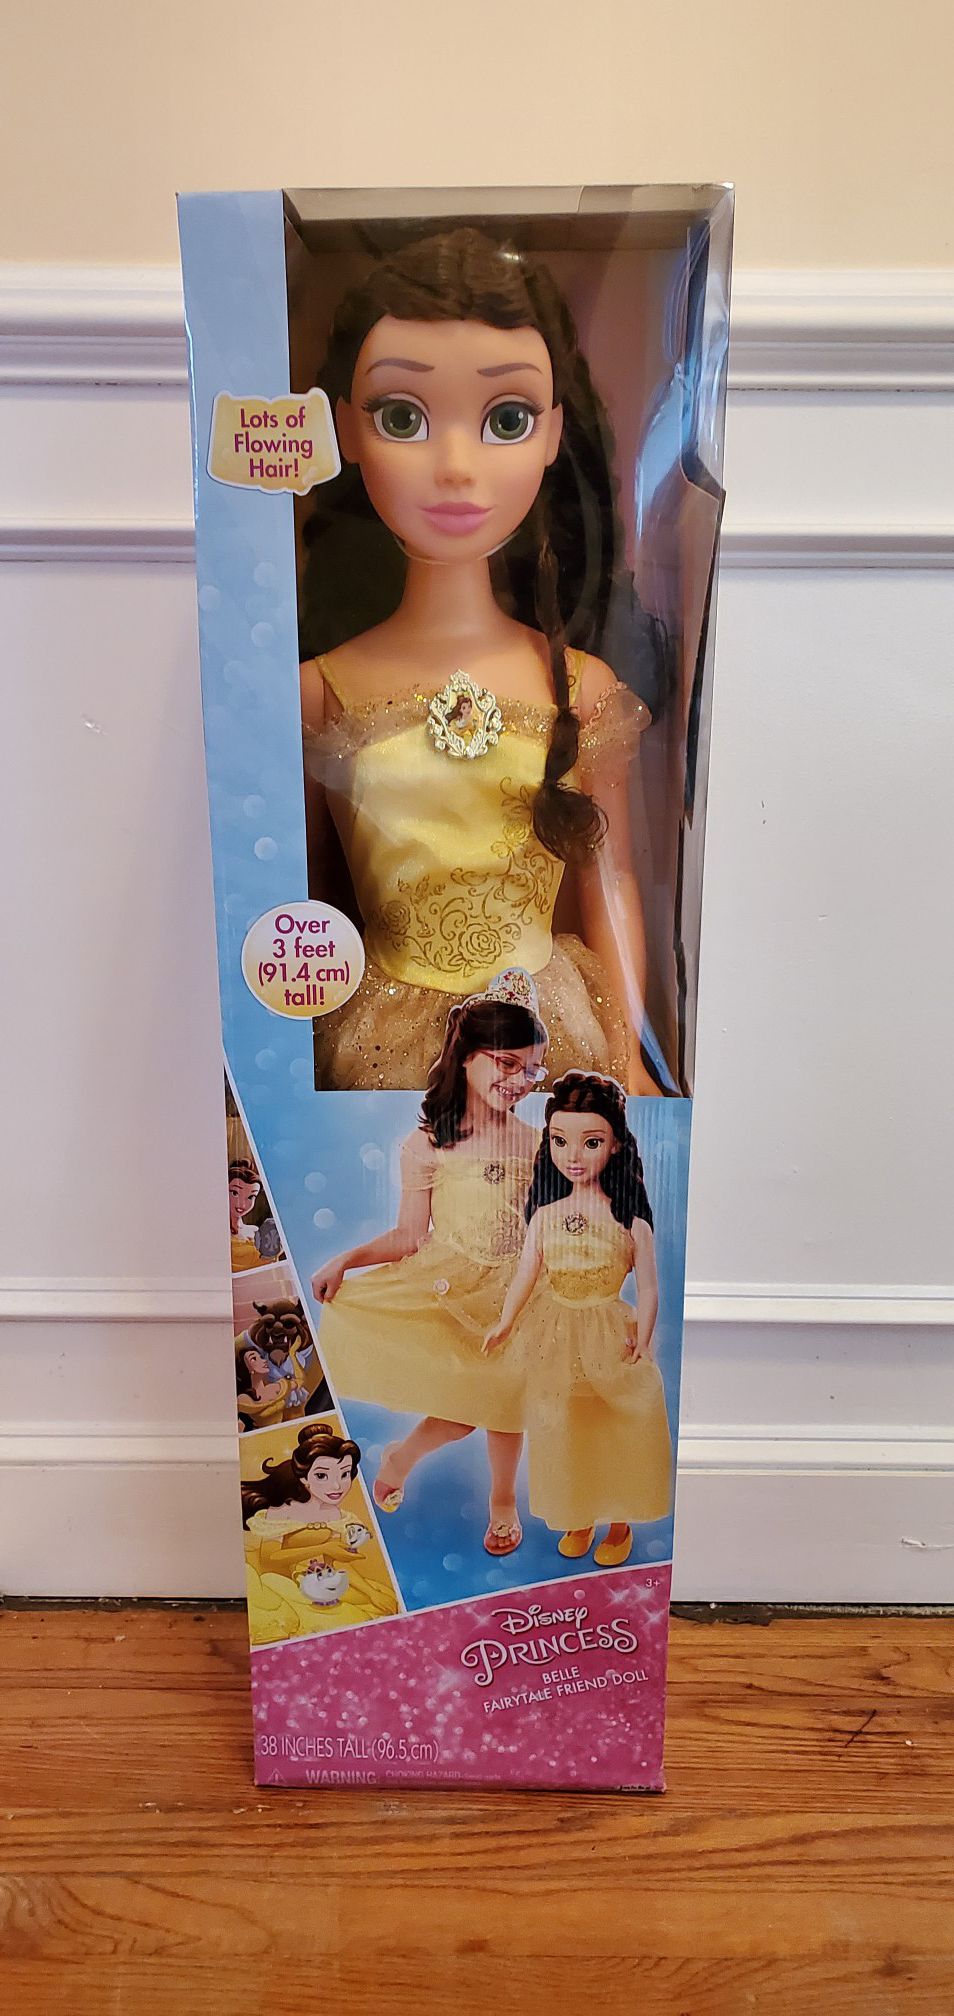 My size Belle doll. 38" tall